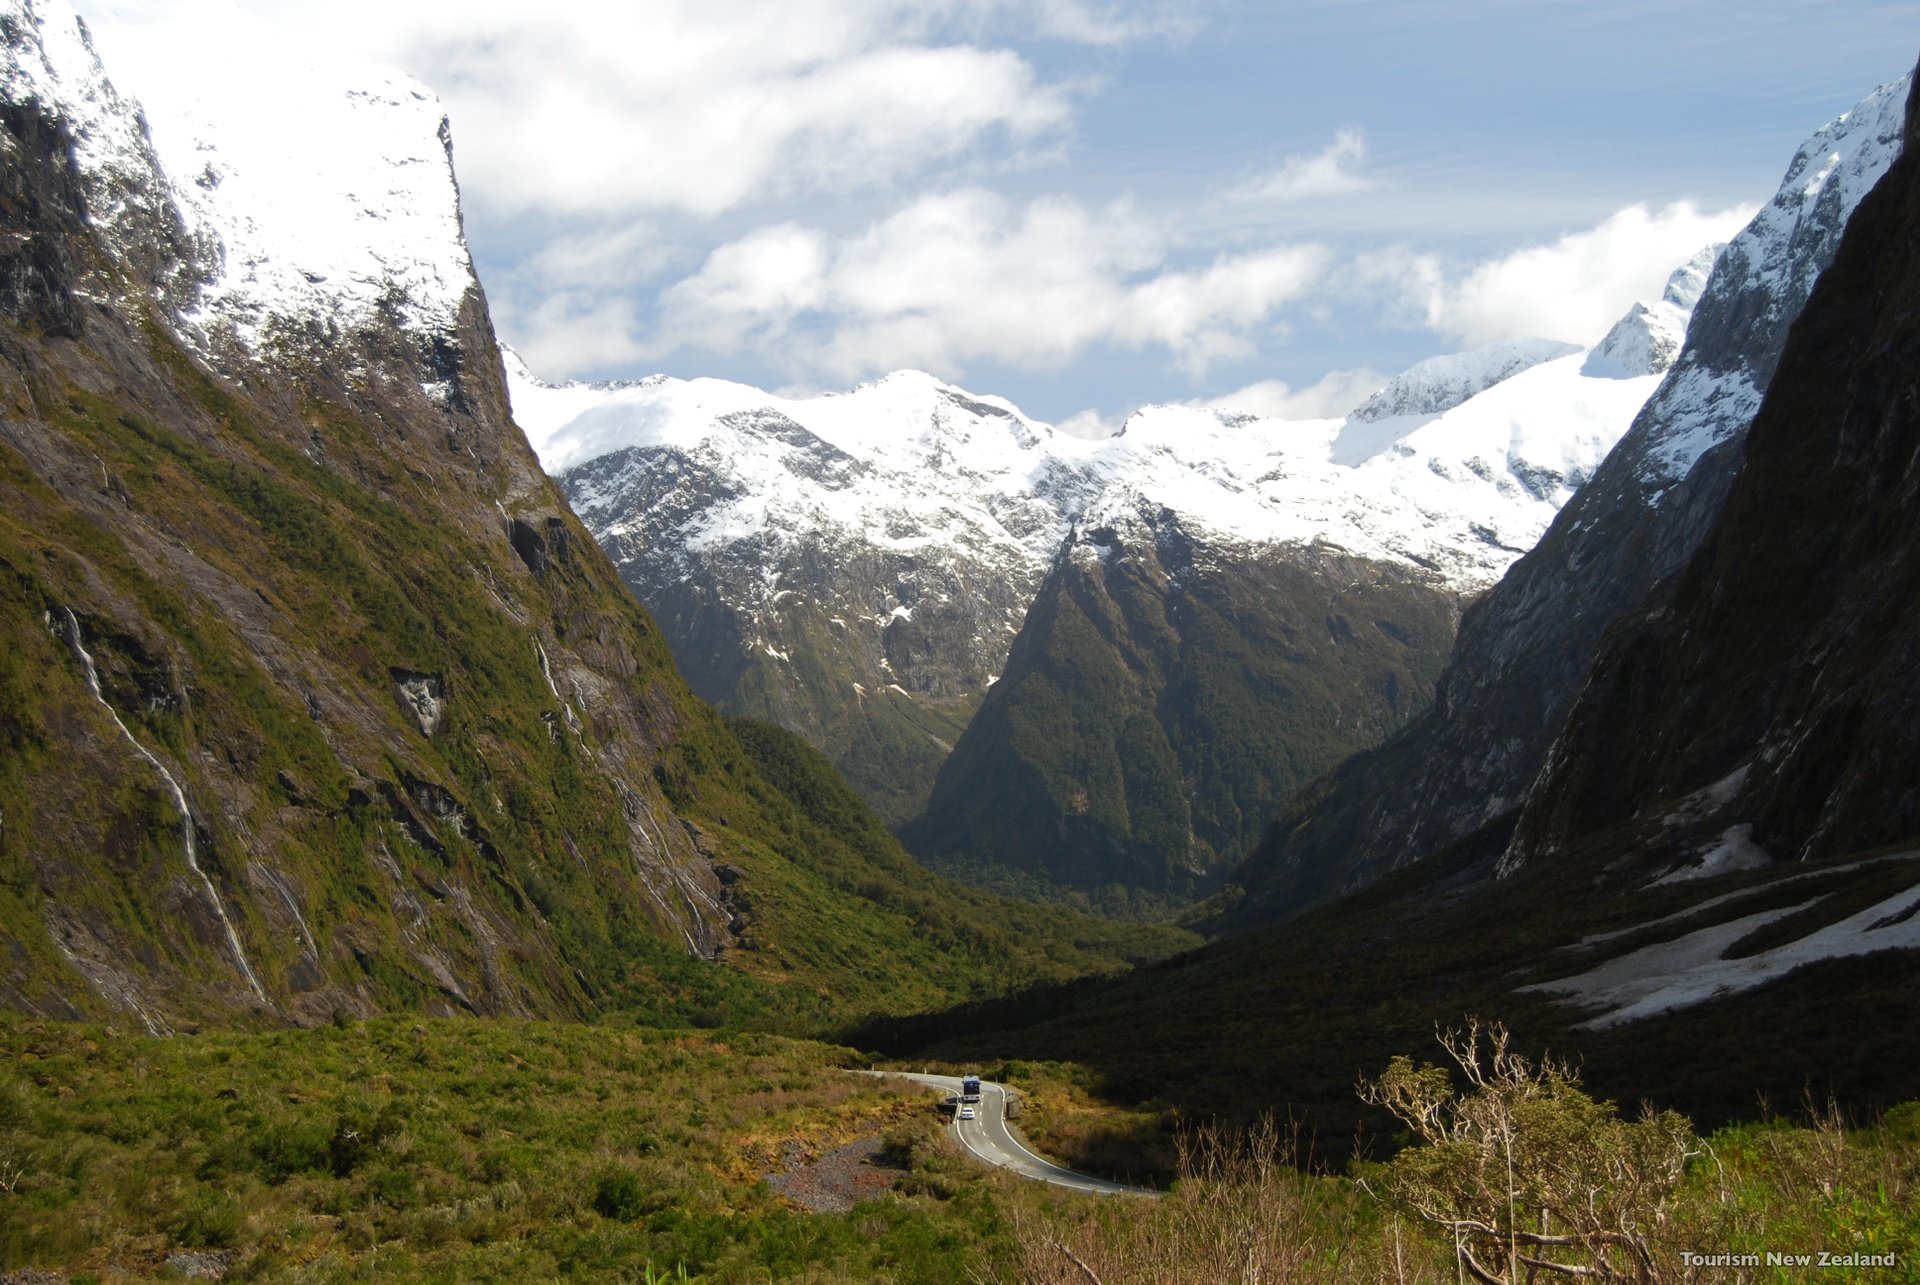 The road to Milford Sound passes through the Cleddau Valley. Image courtesy TNZ.